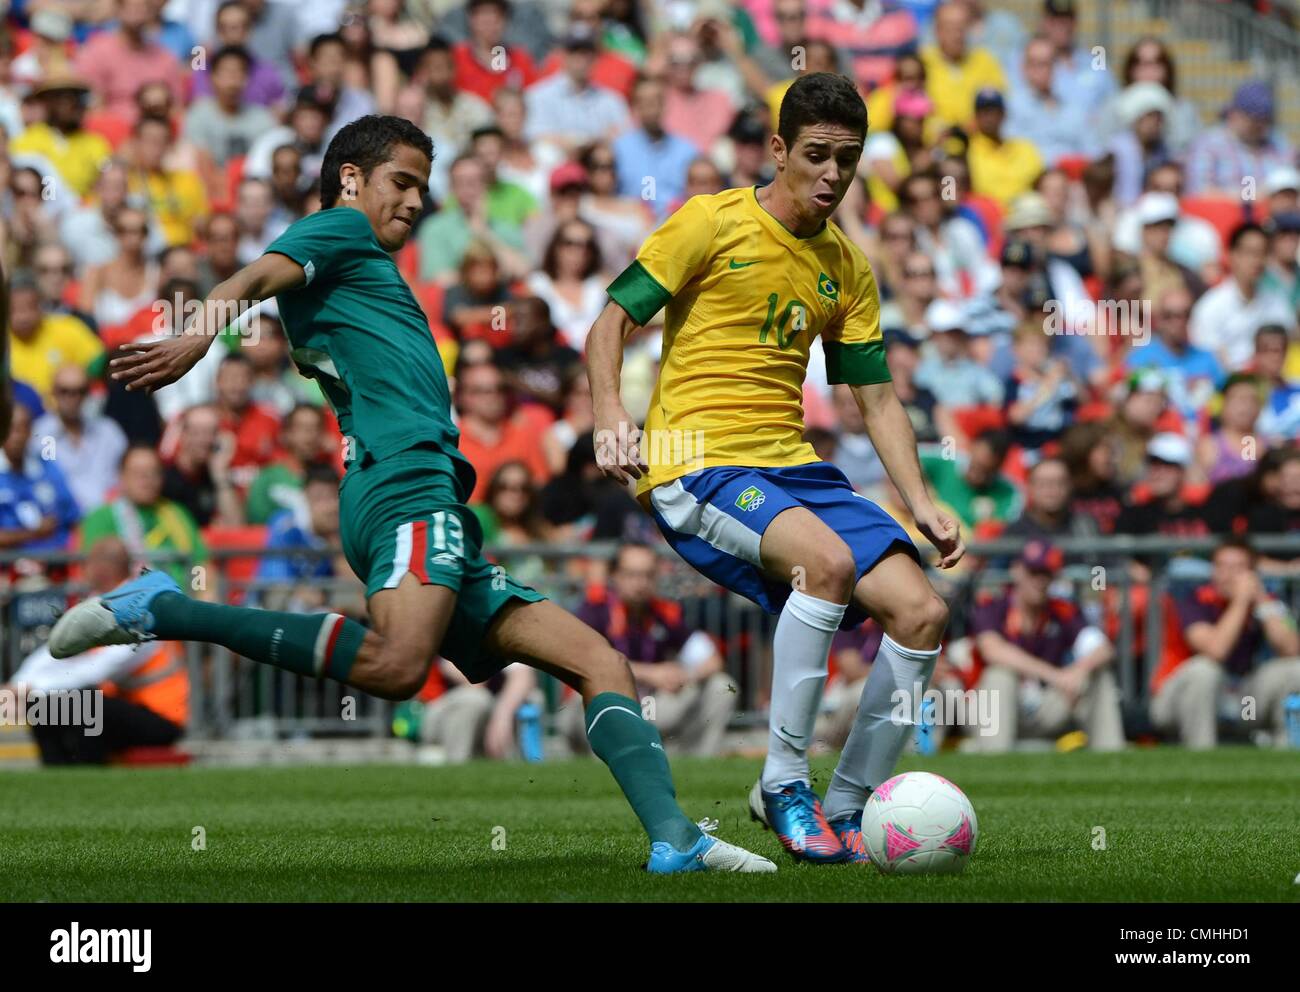 11.08.2012. Wembley Stadium, London, England. Oscar Di Santos Junior of Brazil and Diego Reyes of Mexico challenges for The Ball during Men s Football Gold Medal Match between Brazil and Mexico  London 2012 Olympic Games  Mexico Won The Match 2 1 and Won the Gold Medal Stock Photo